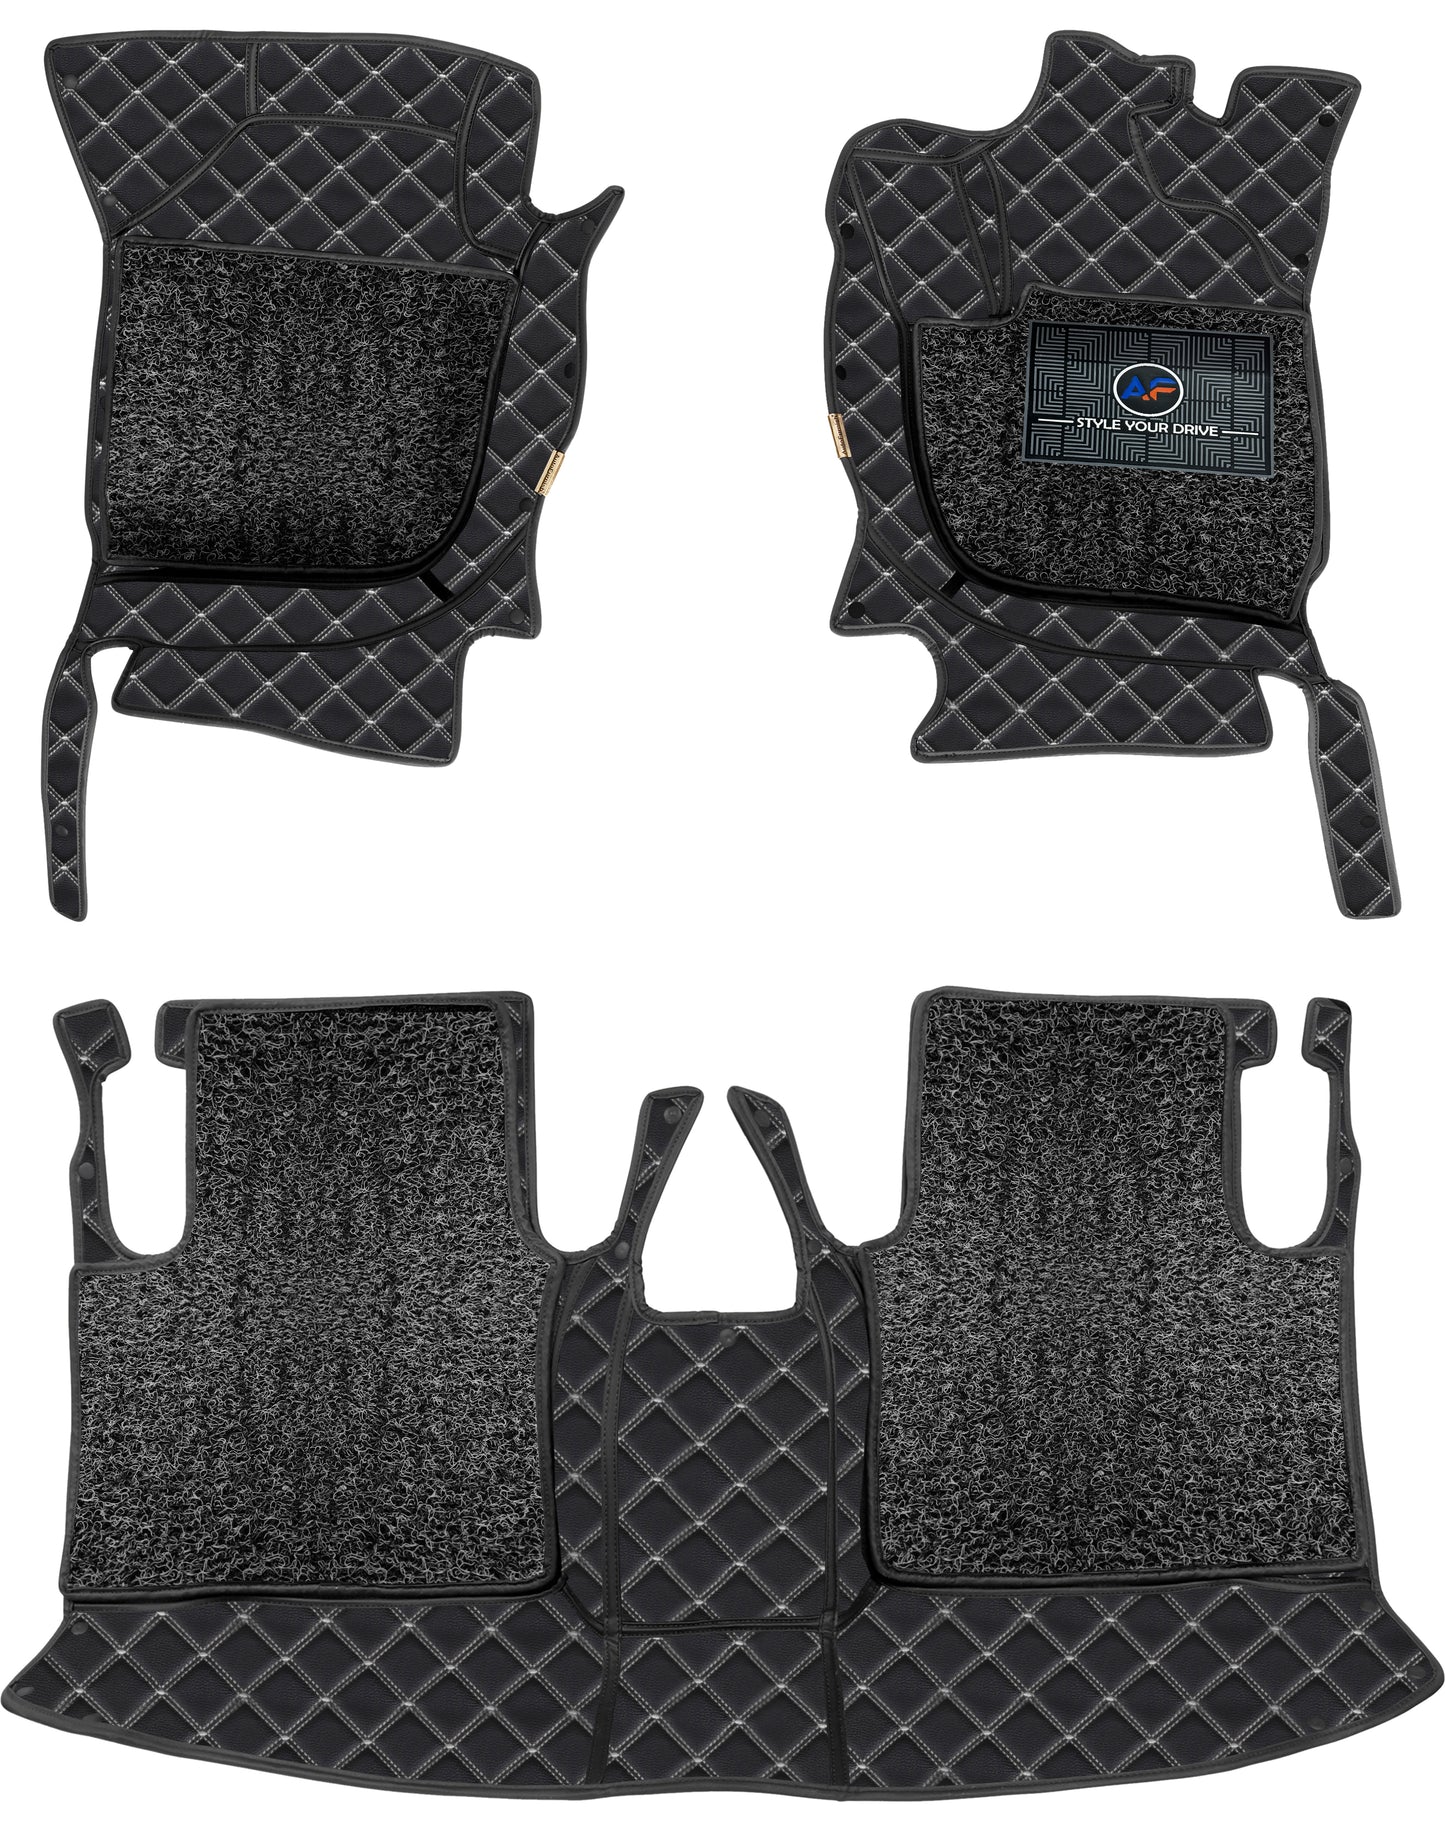 Land Rover Discovery Sport 2015 7D Luxury Car Mat, All Weather Proof, Anti-Skid, 100% Waterproof & Odorless with Unique Diamond Fish Design (24mm Luxury PU Leather, 2 Rows)